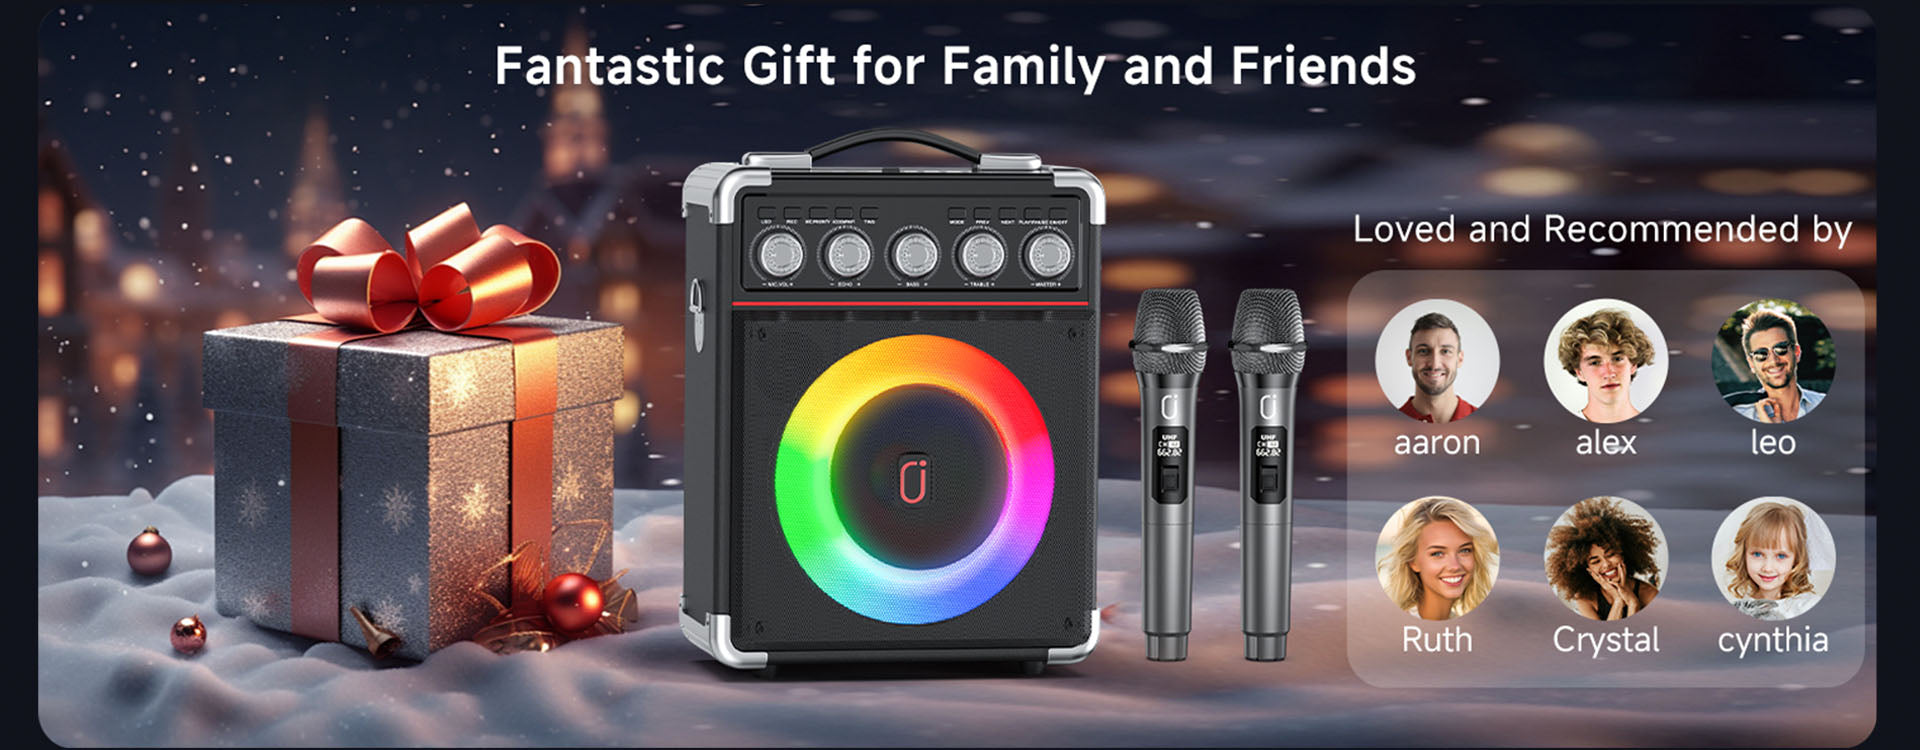 Recommended by influencers, the best gift for family and friends.